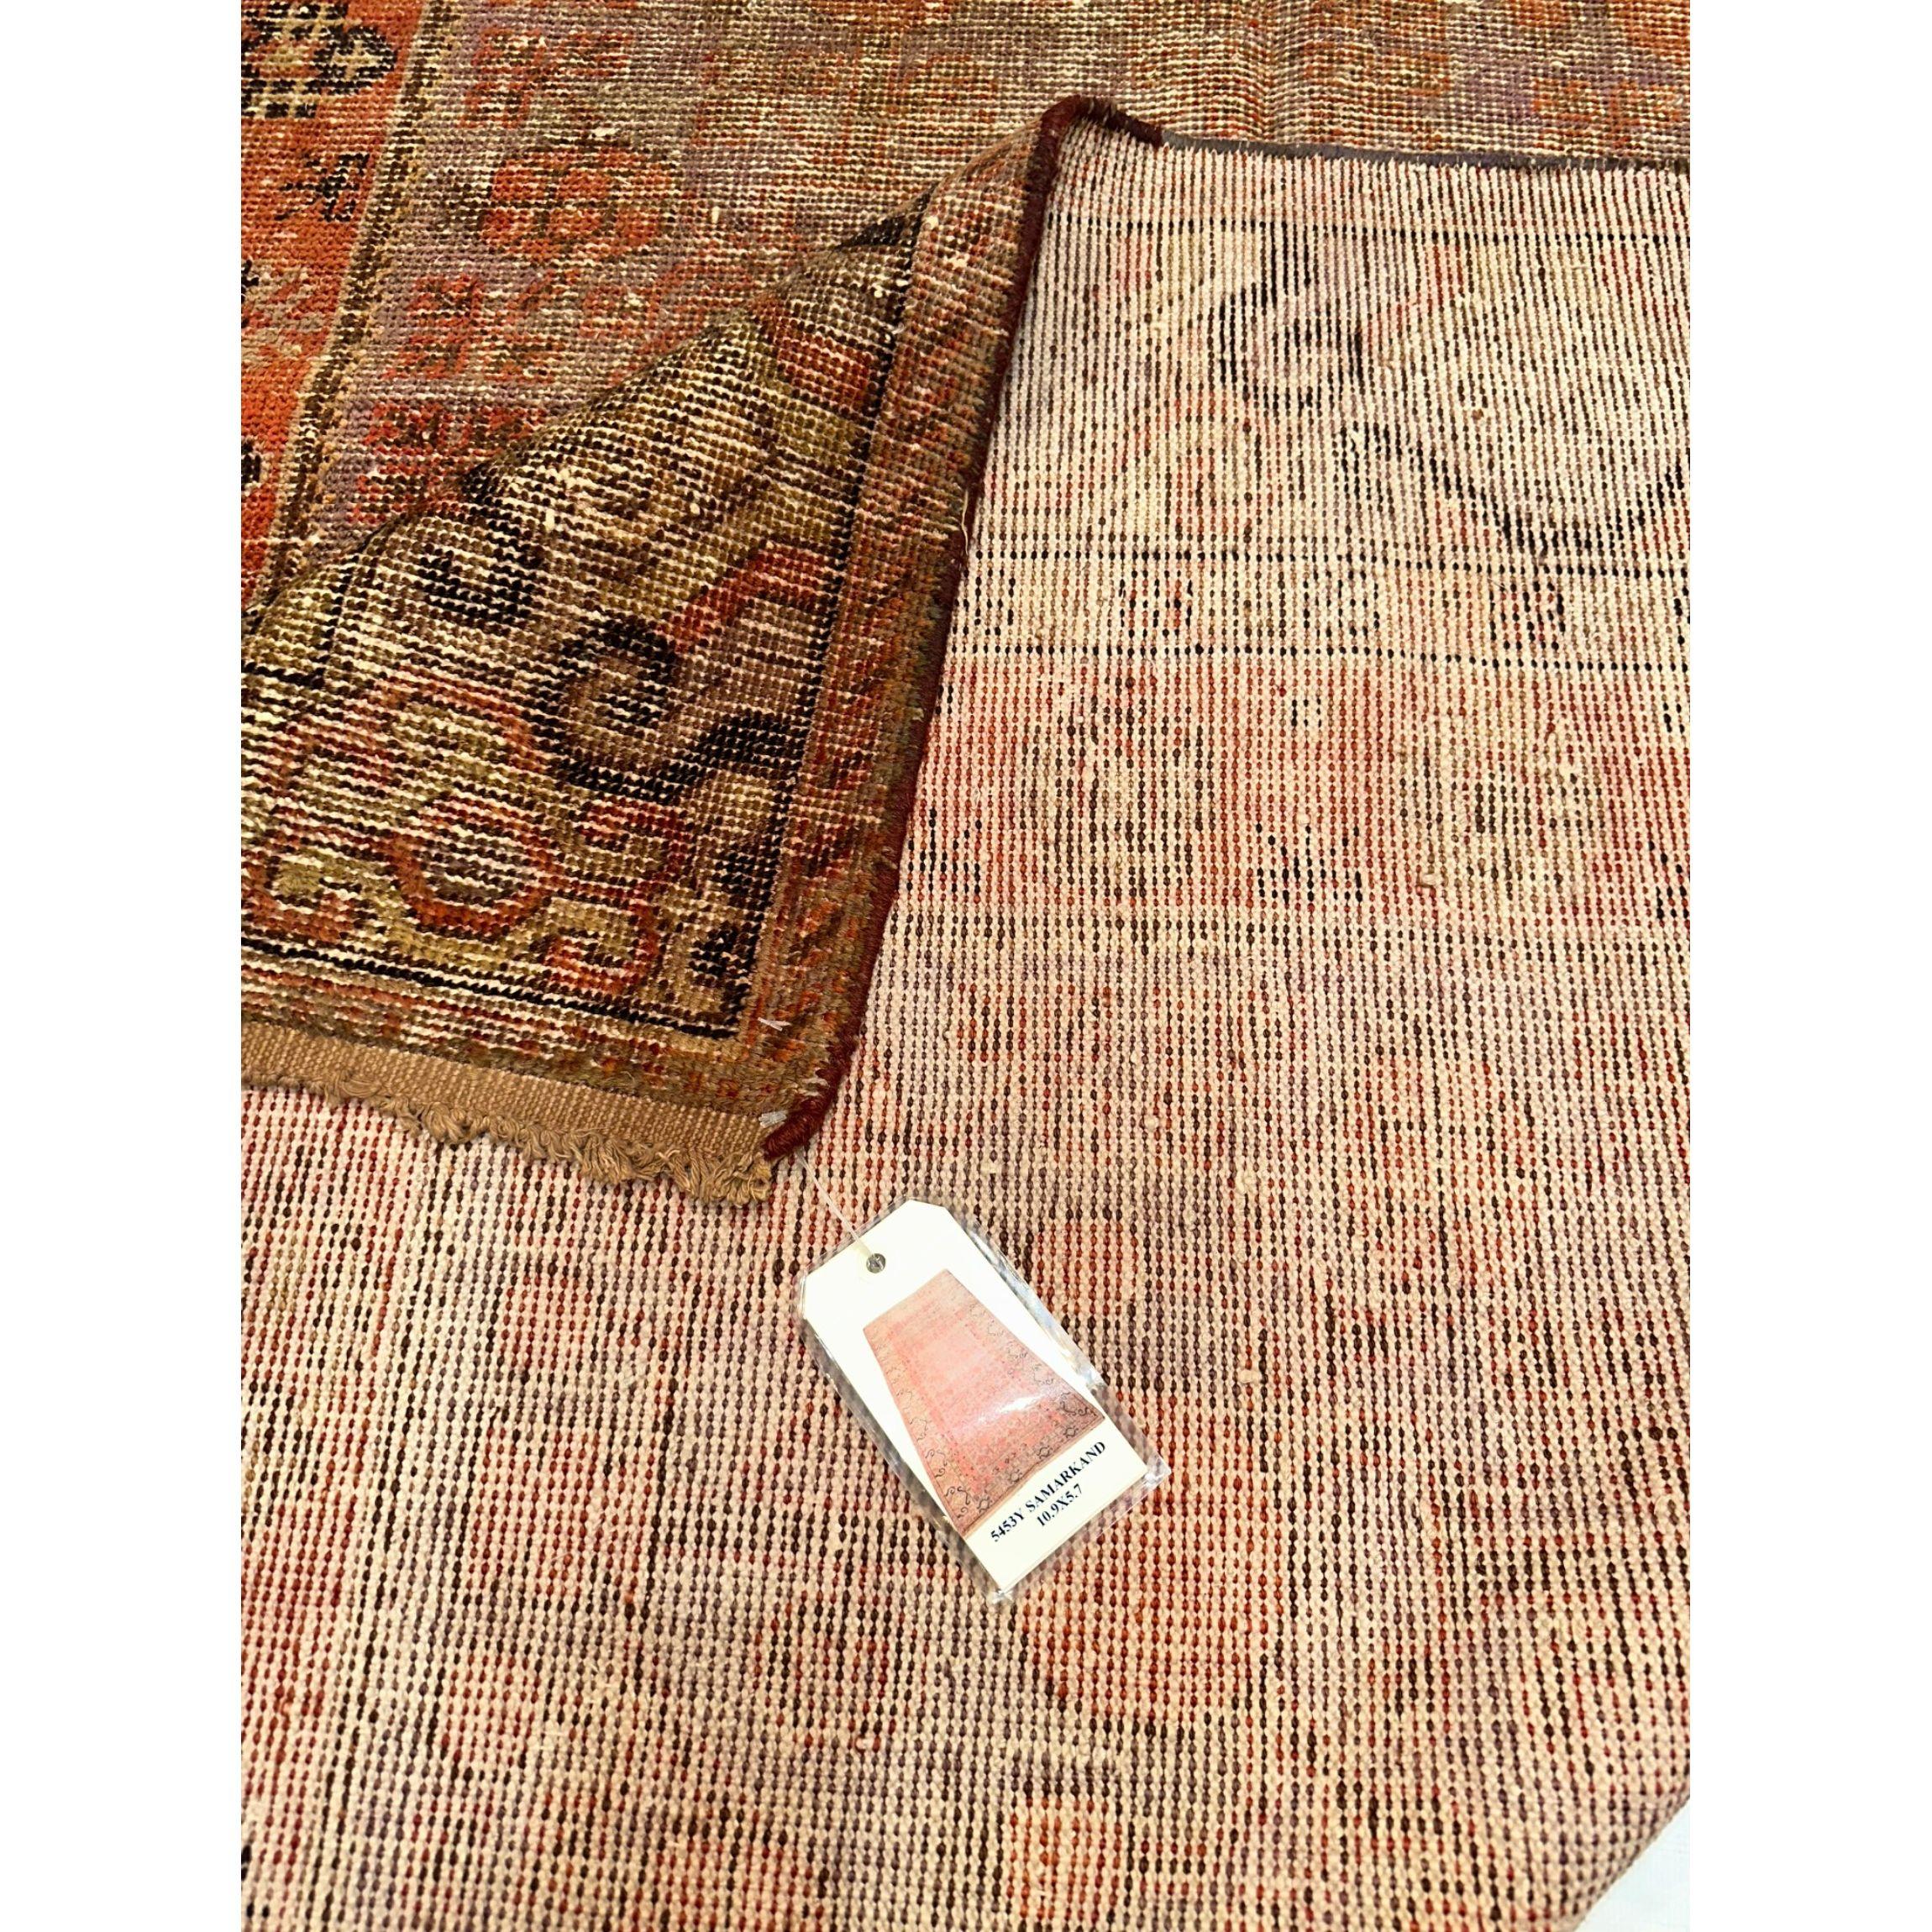 Authentic Khotan Samarkand Mid-19th Century Rug In Good Condition For Sale In Los Angeles, US